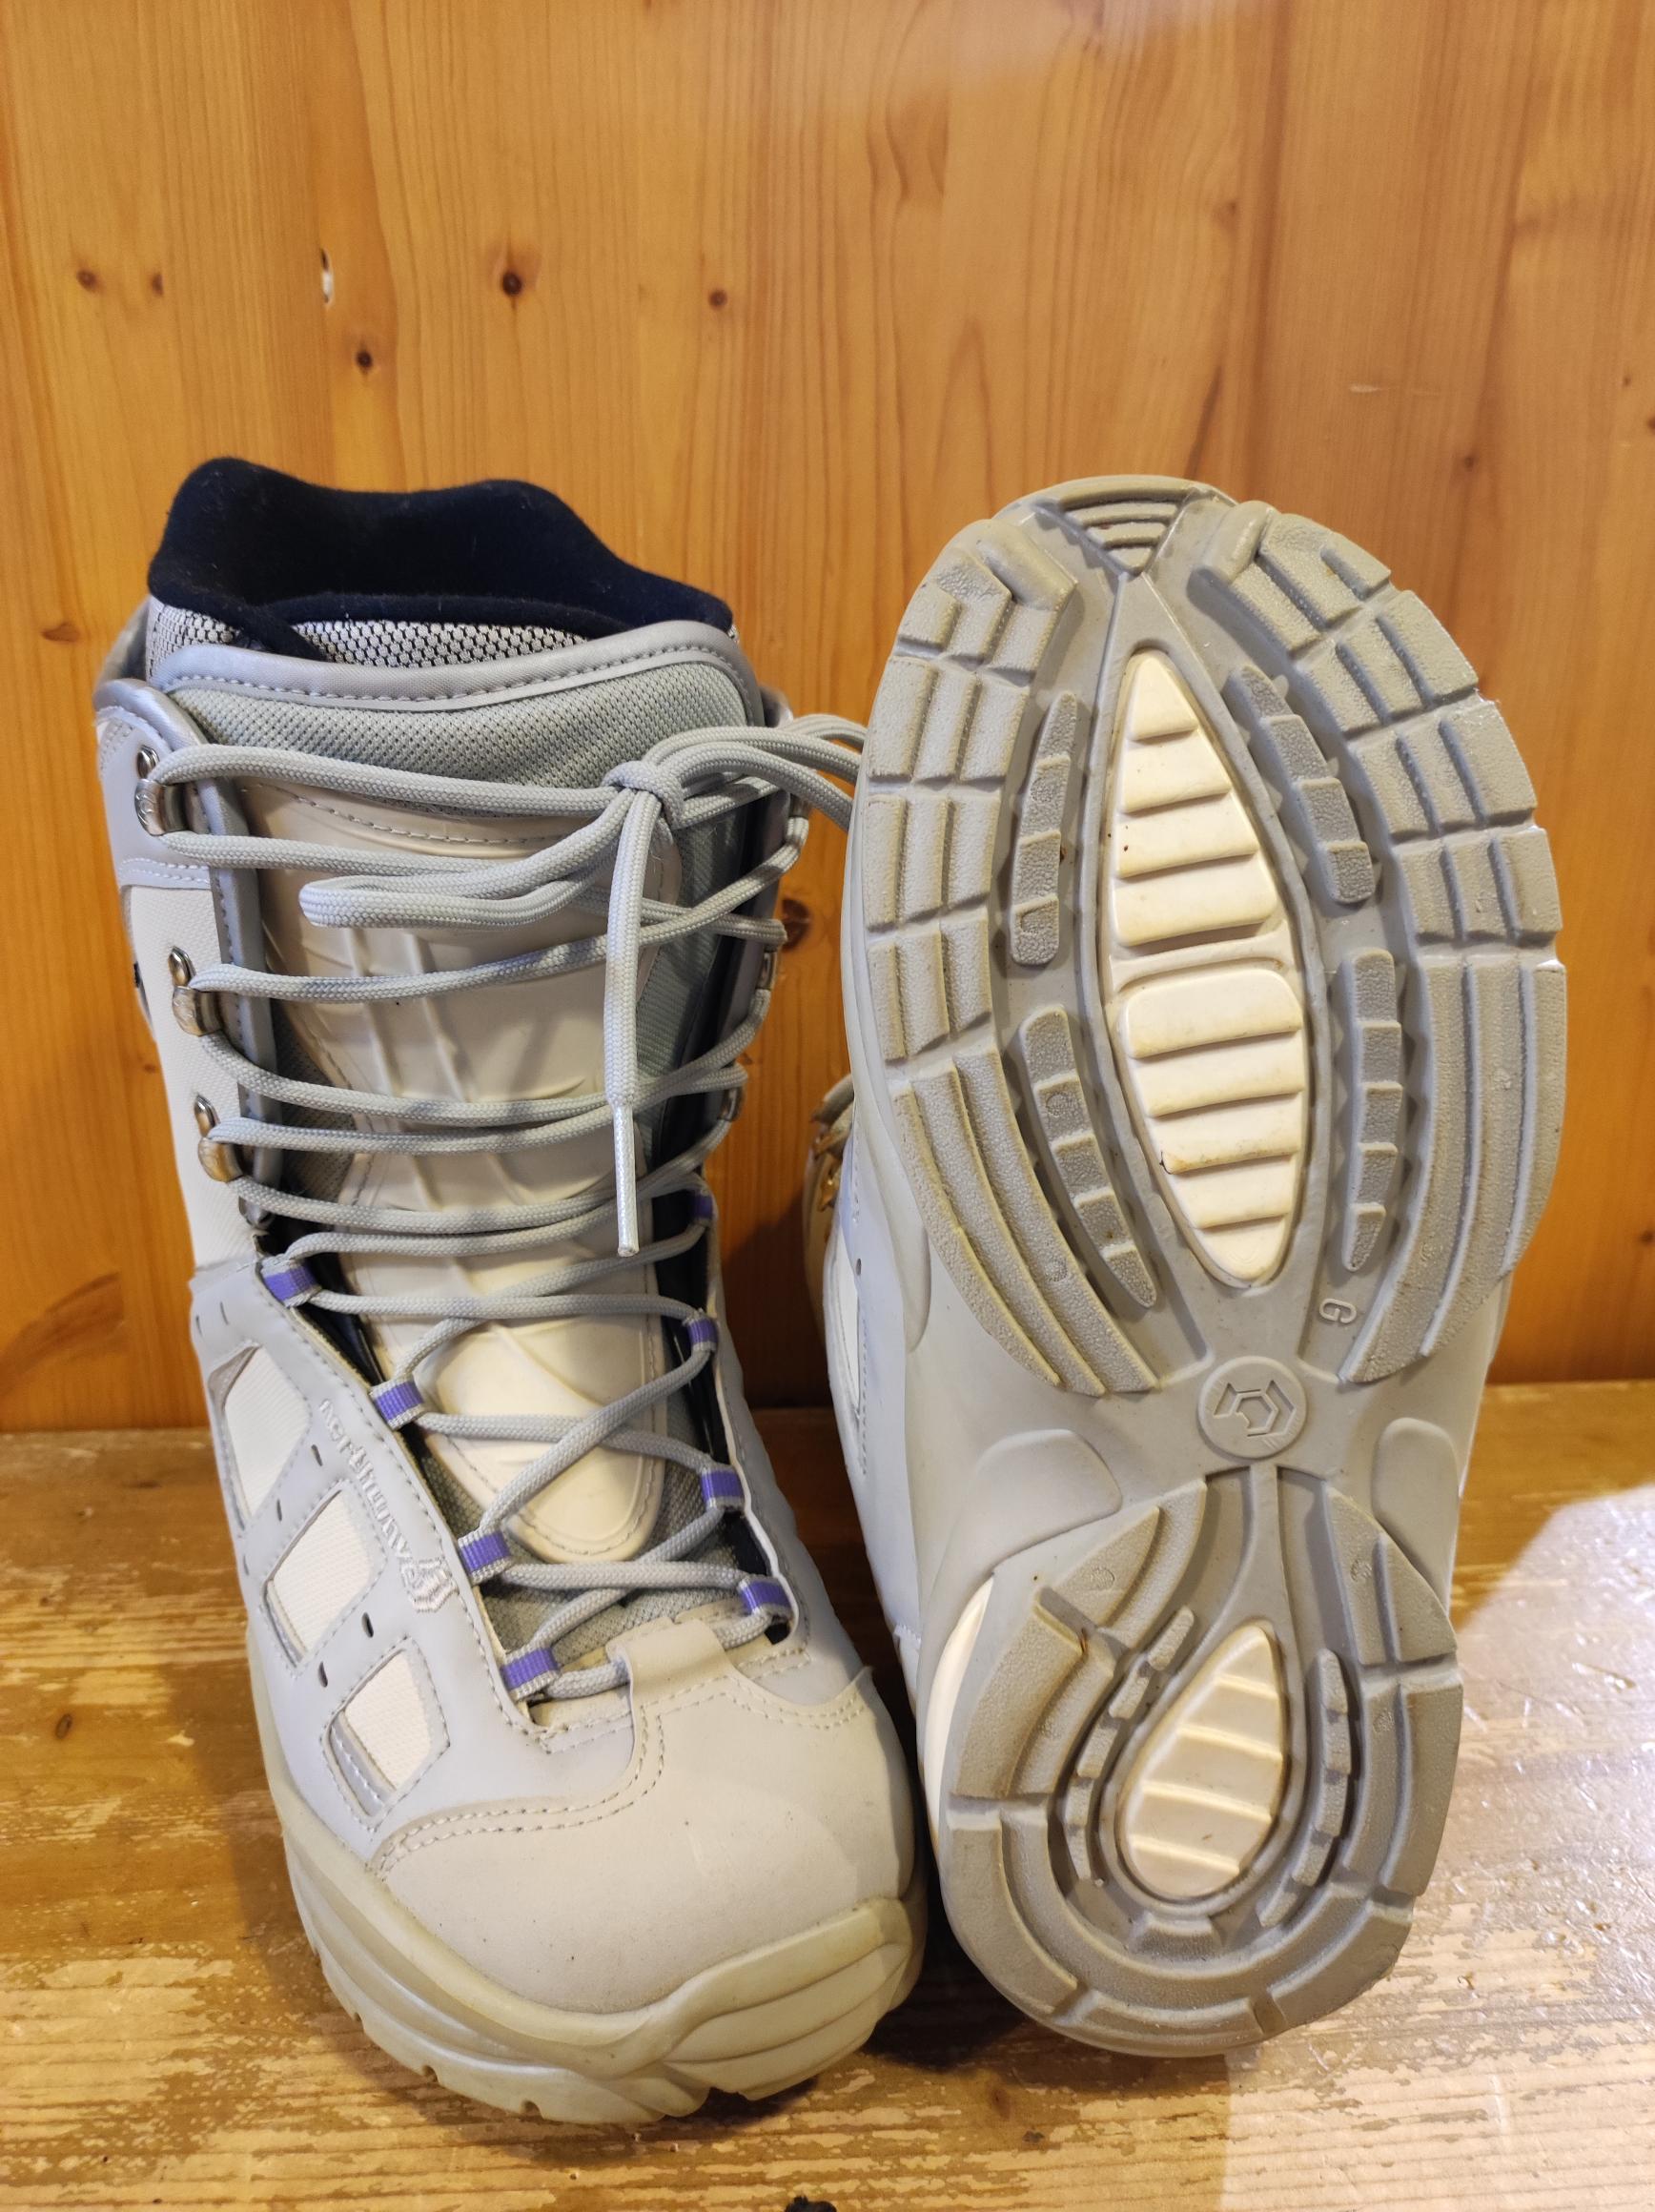 BOOTS NORTHWAVE FREEDOM